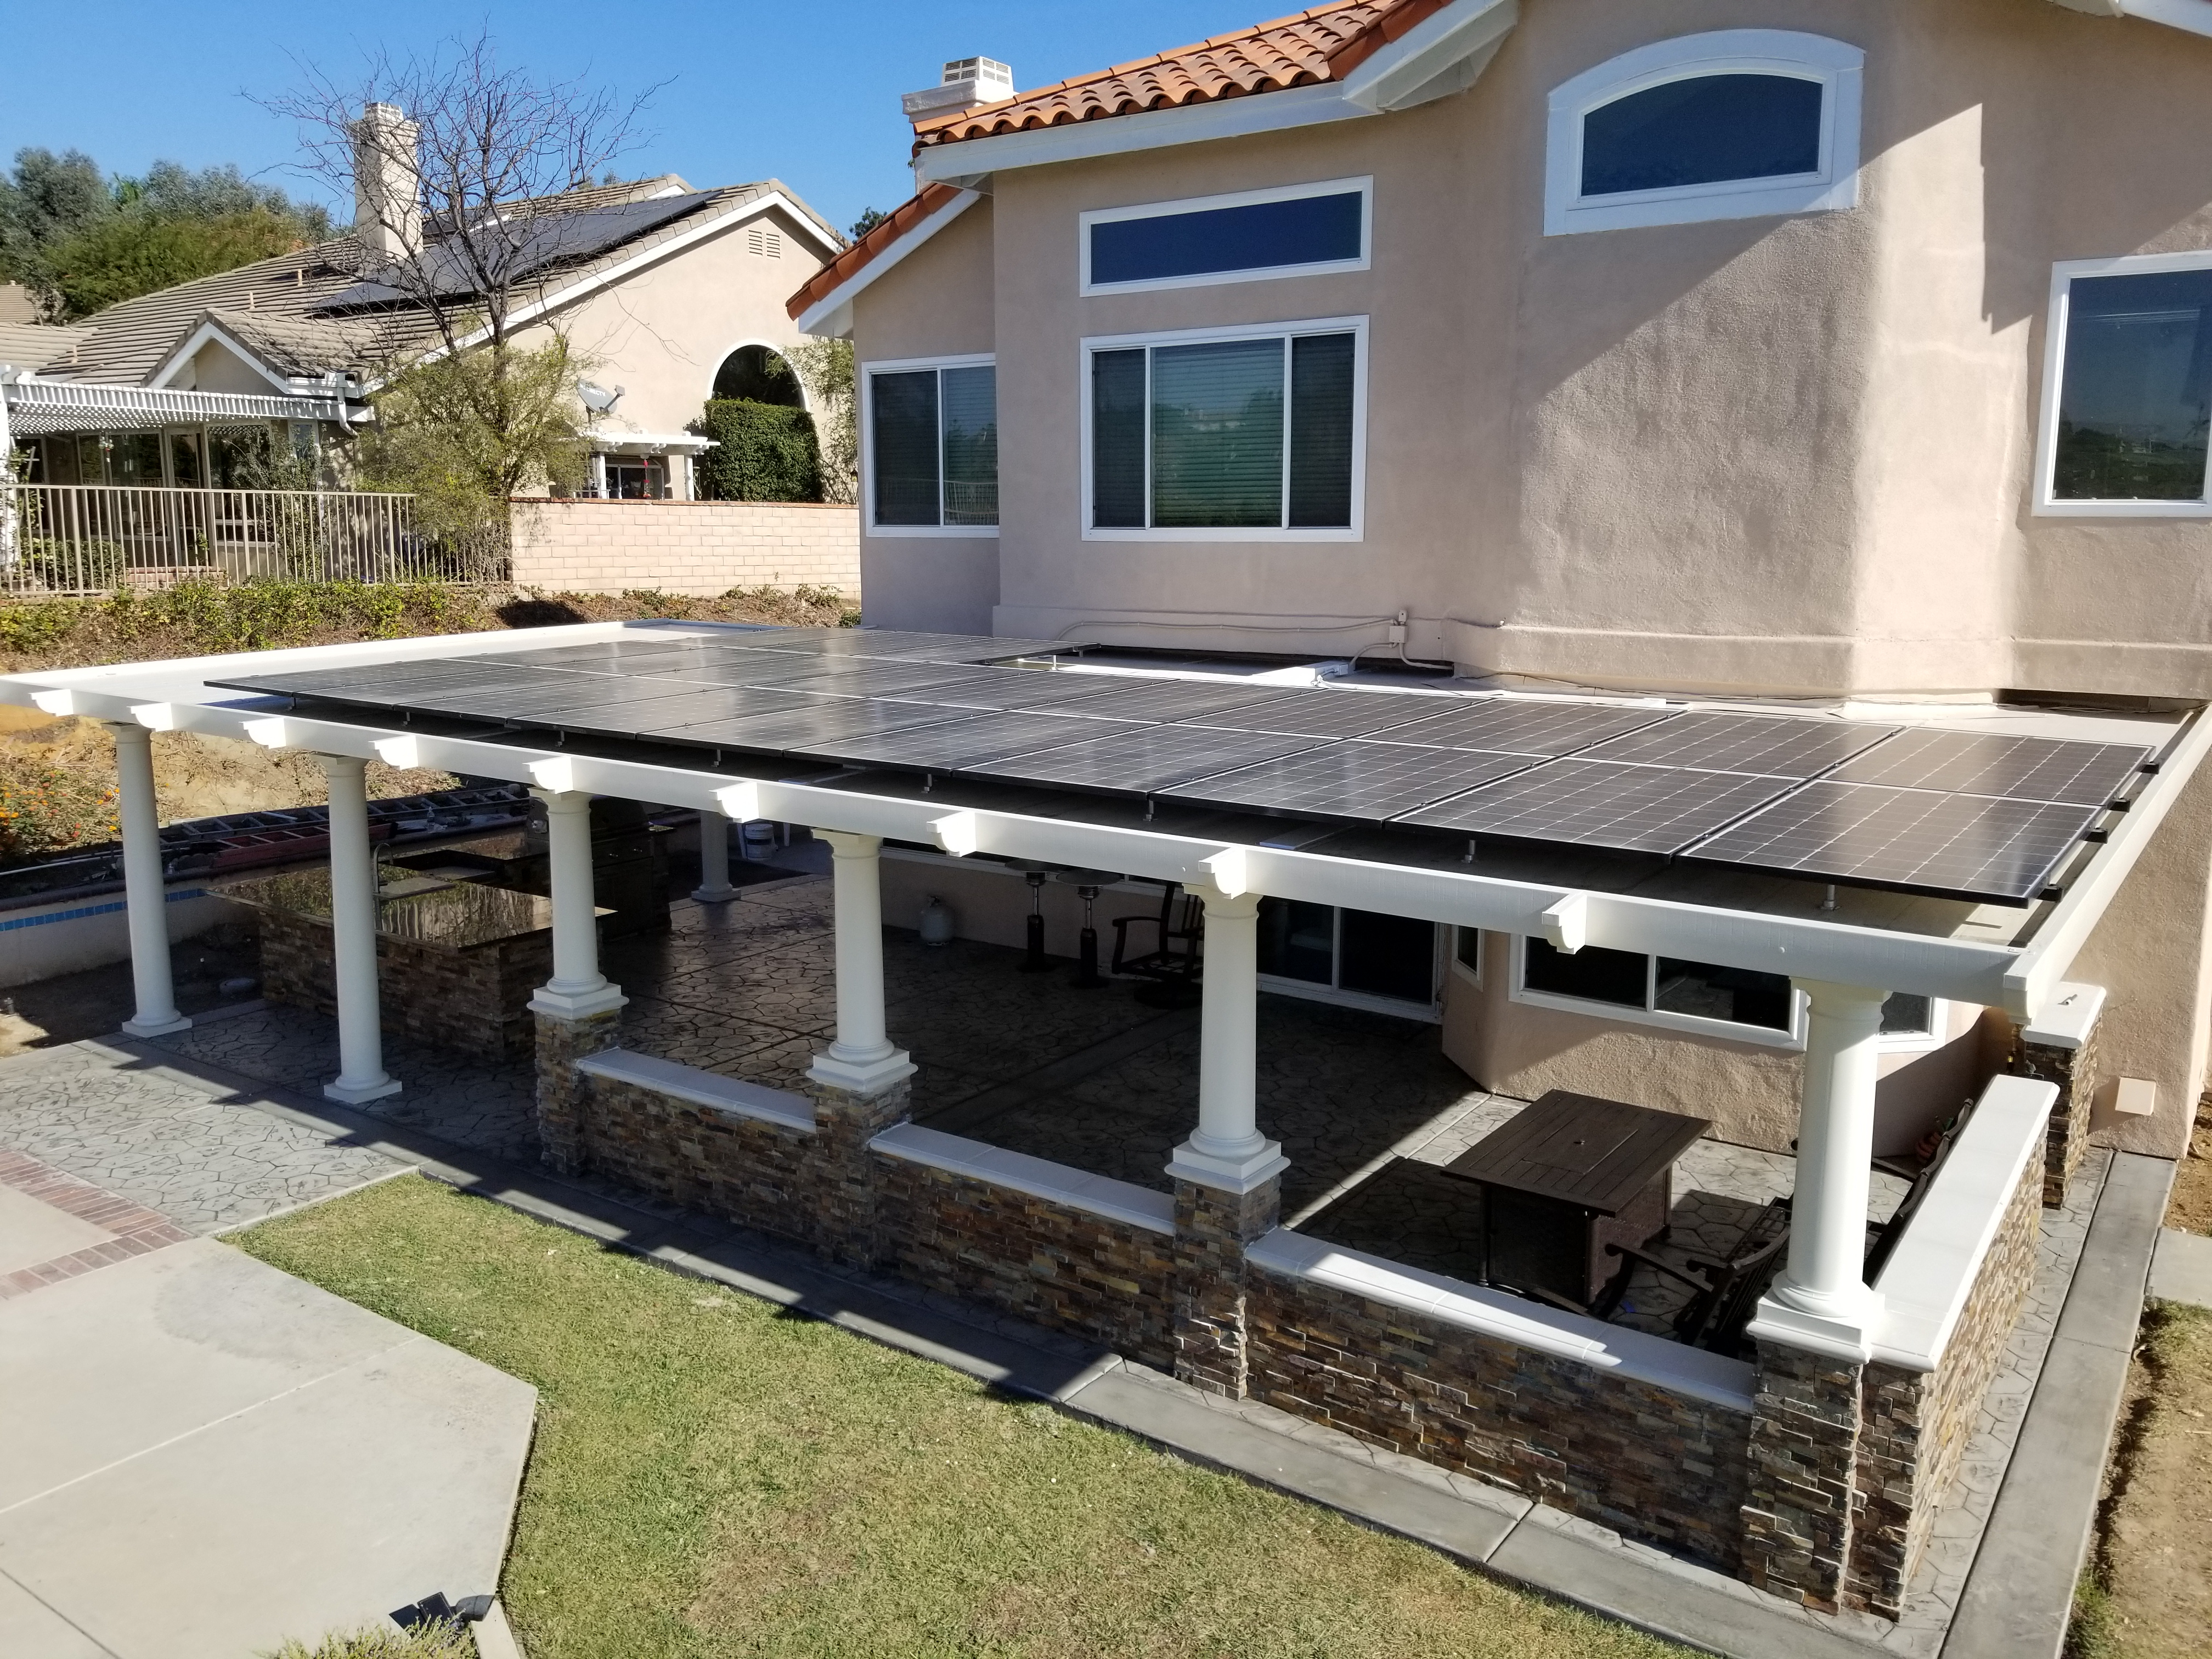 Patio Cover Archives Evolution Solar Energy in dimensions 4032 X 3024